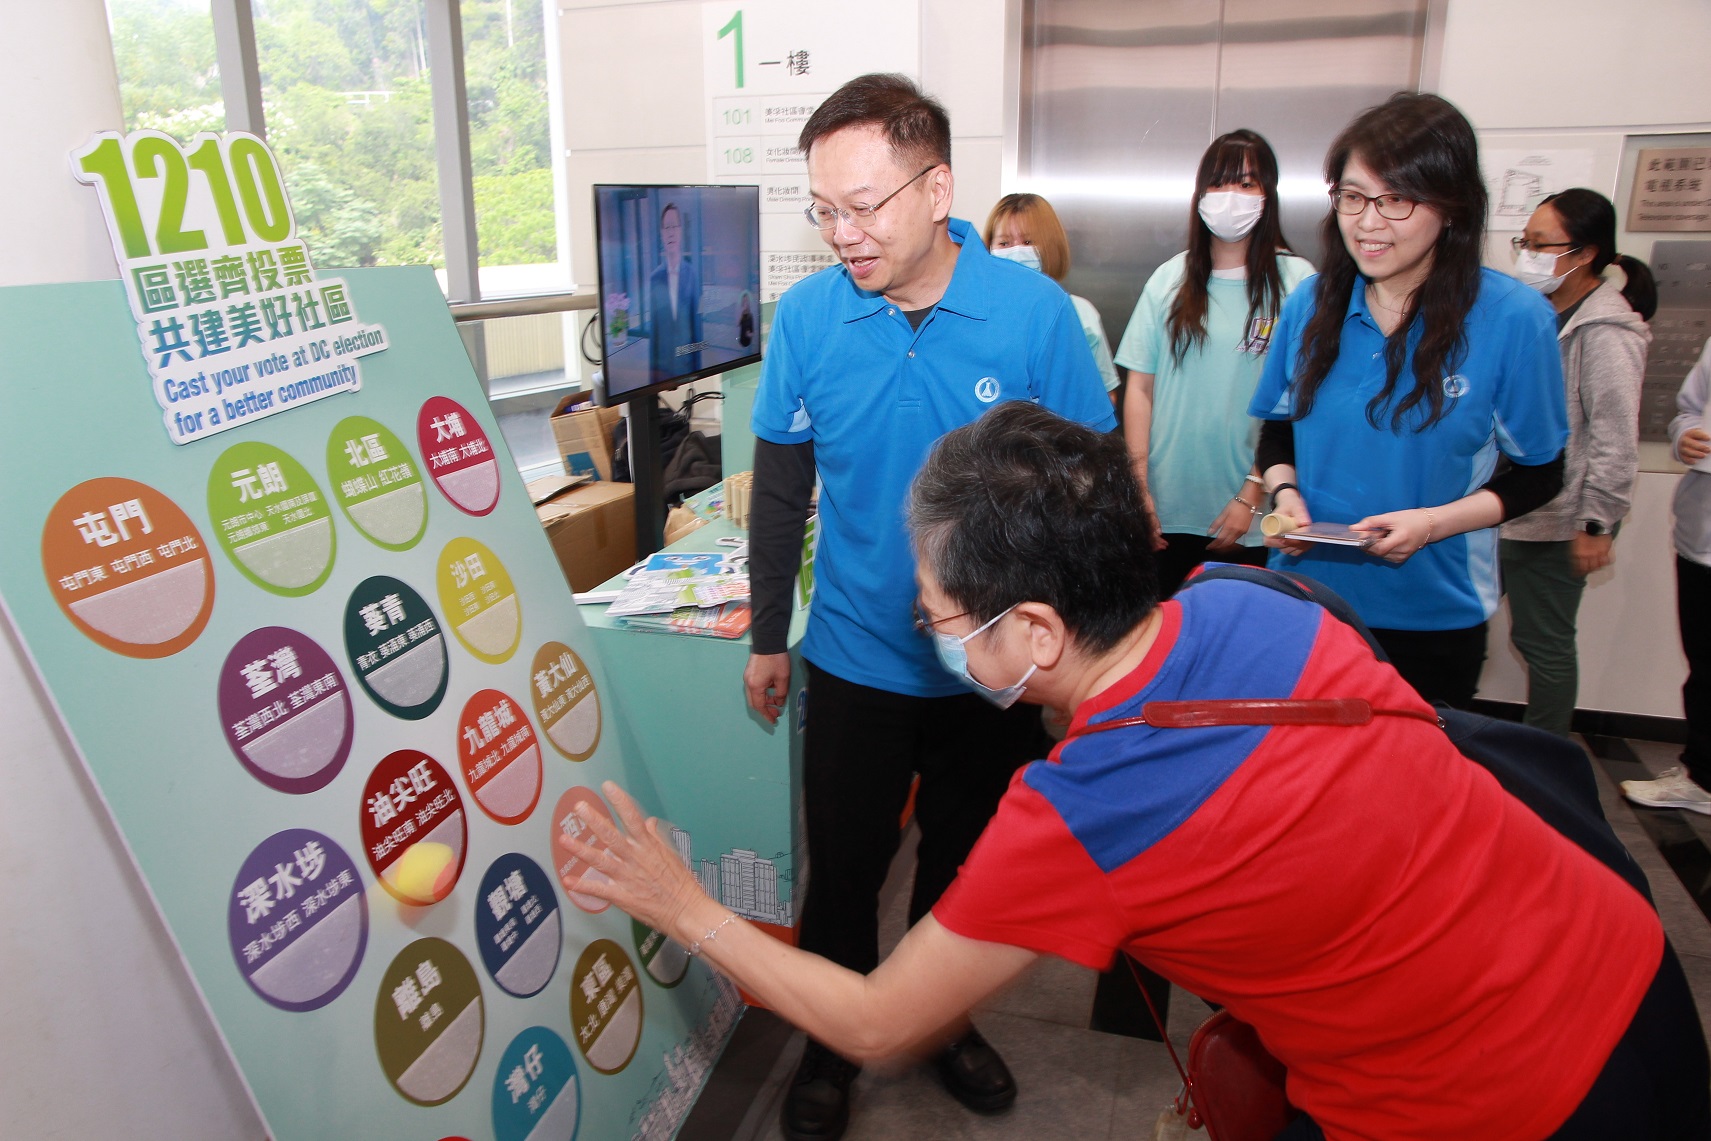 Photo 5: The Government Chemist, Dr LEE Wai-on playing interactive games with the public.